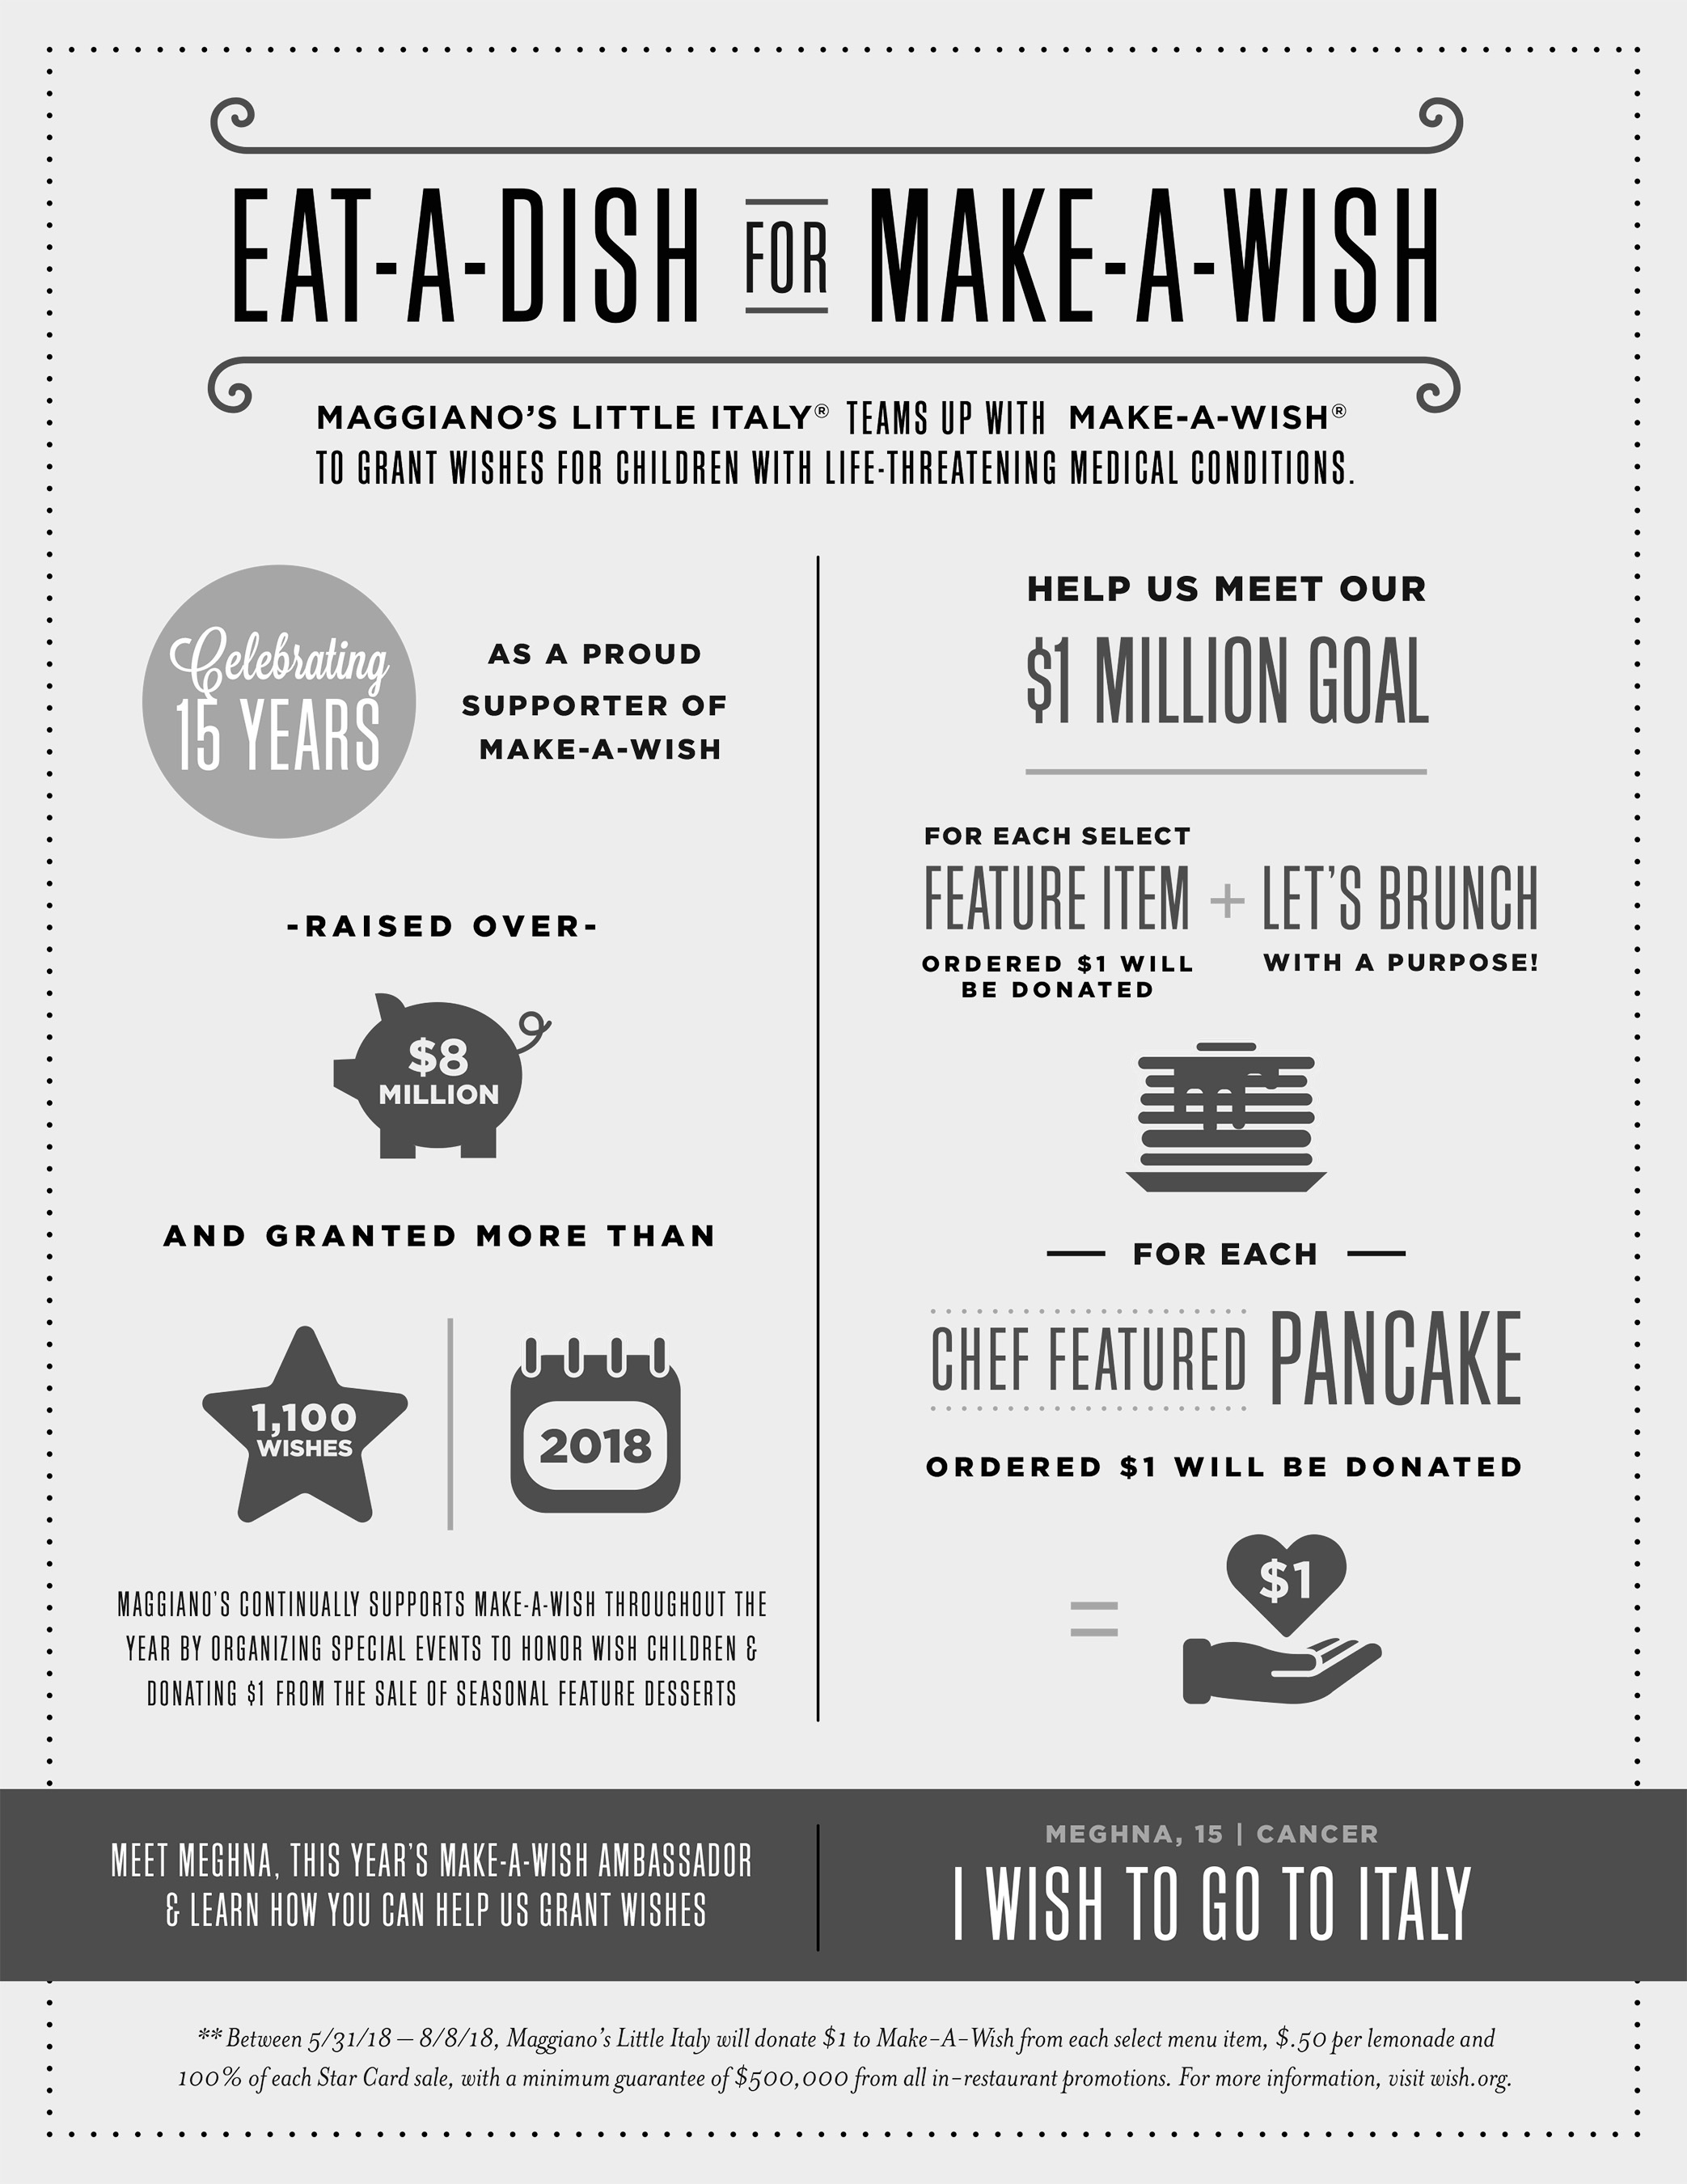 Eat-A-Dish For Make-A-Wish